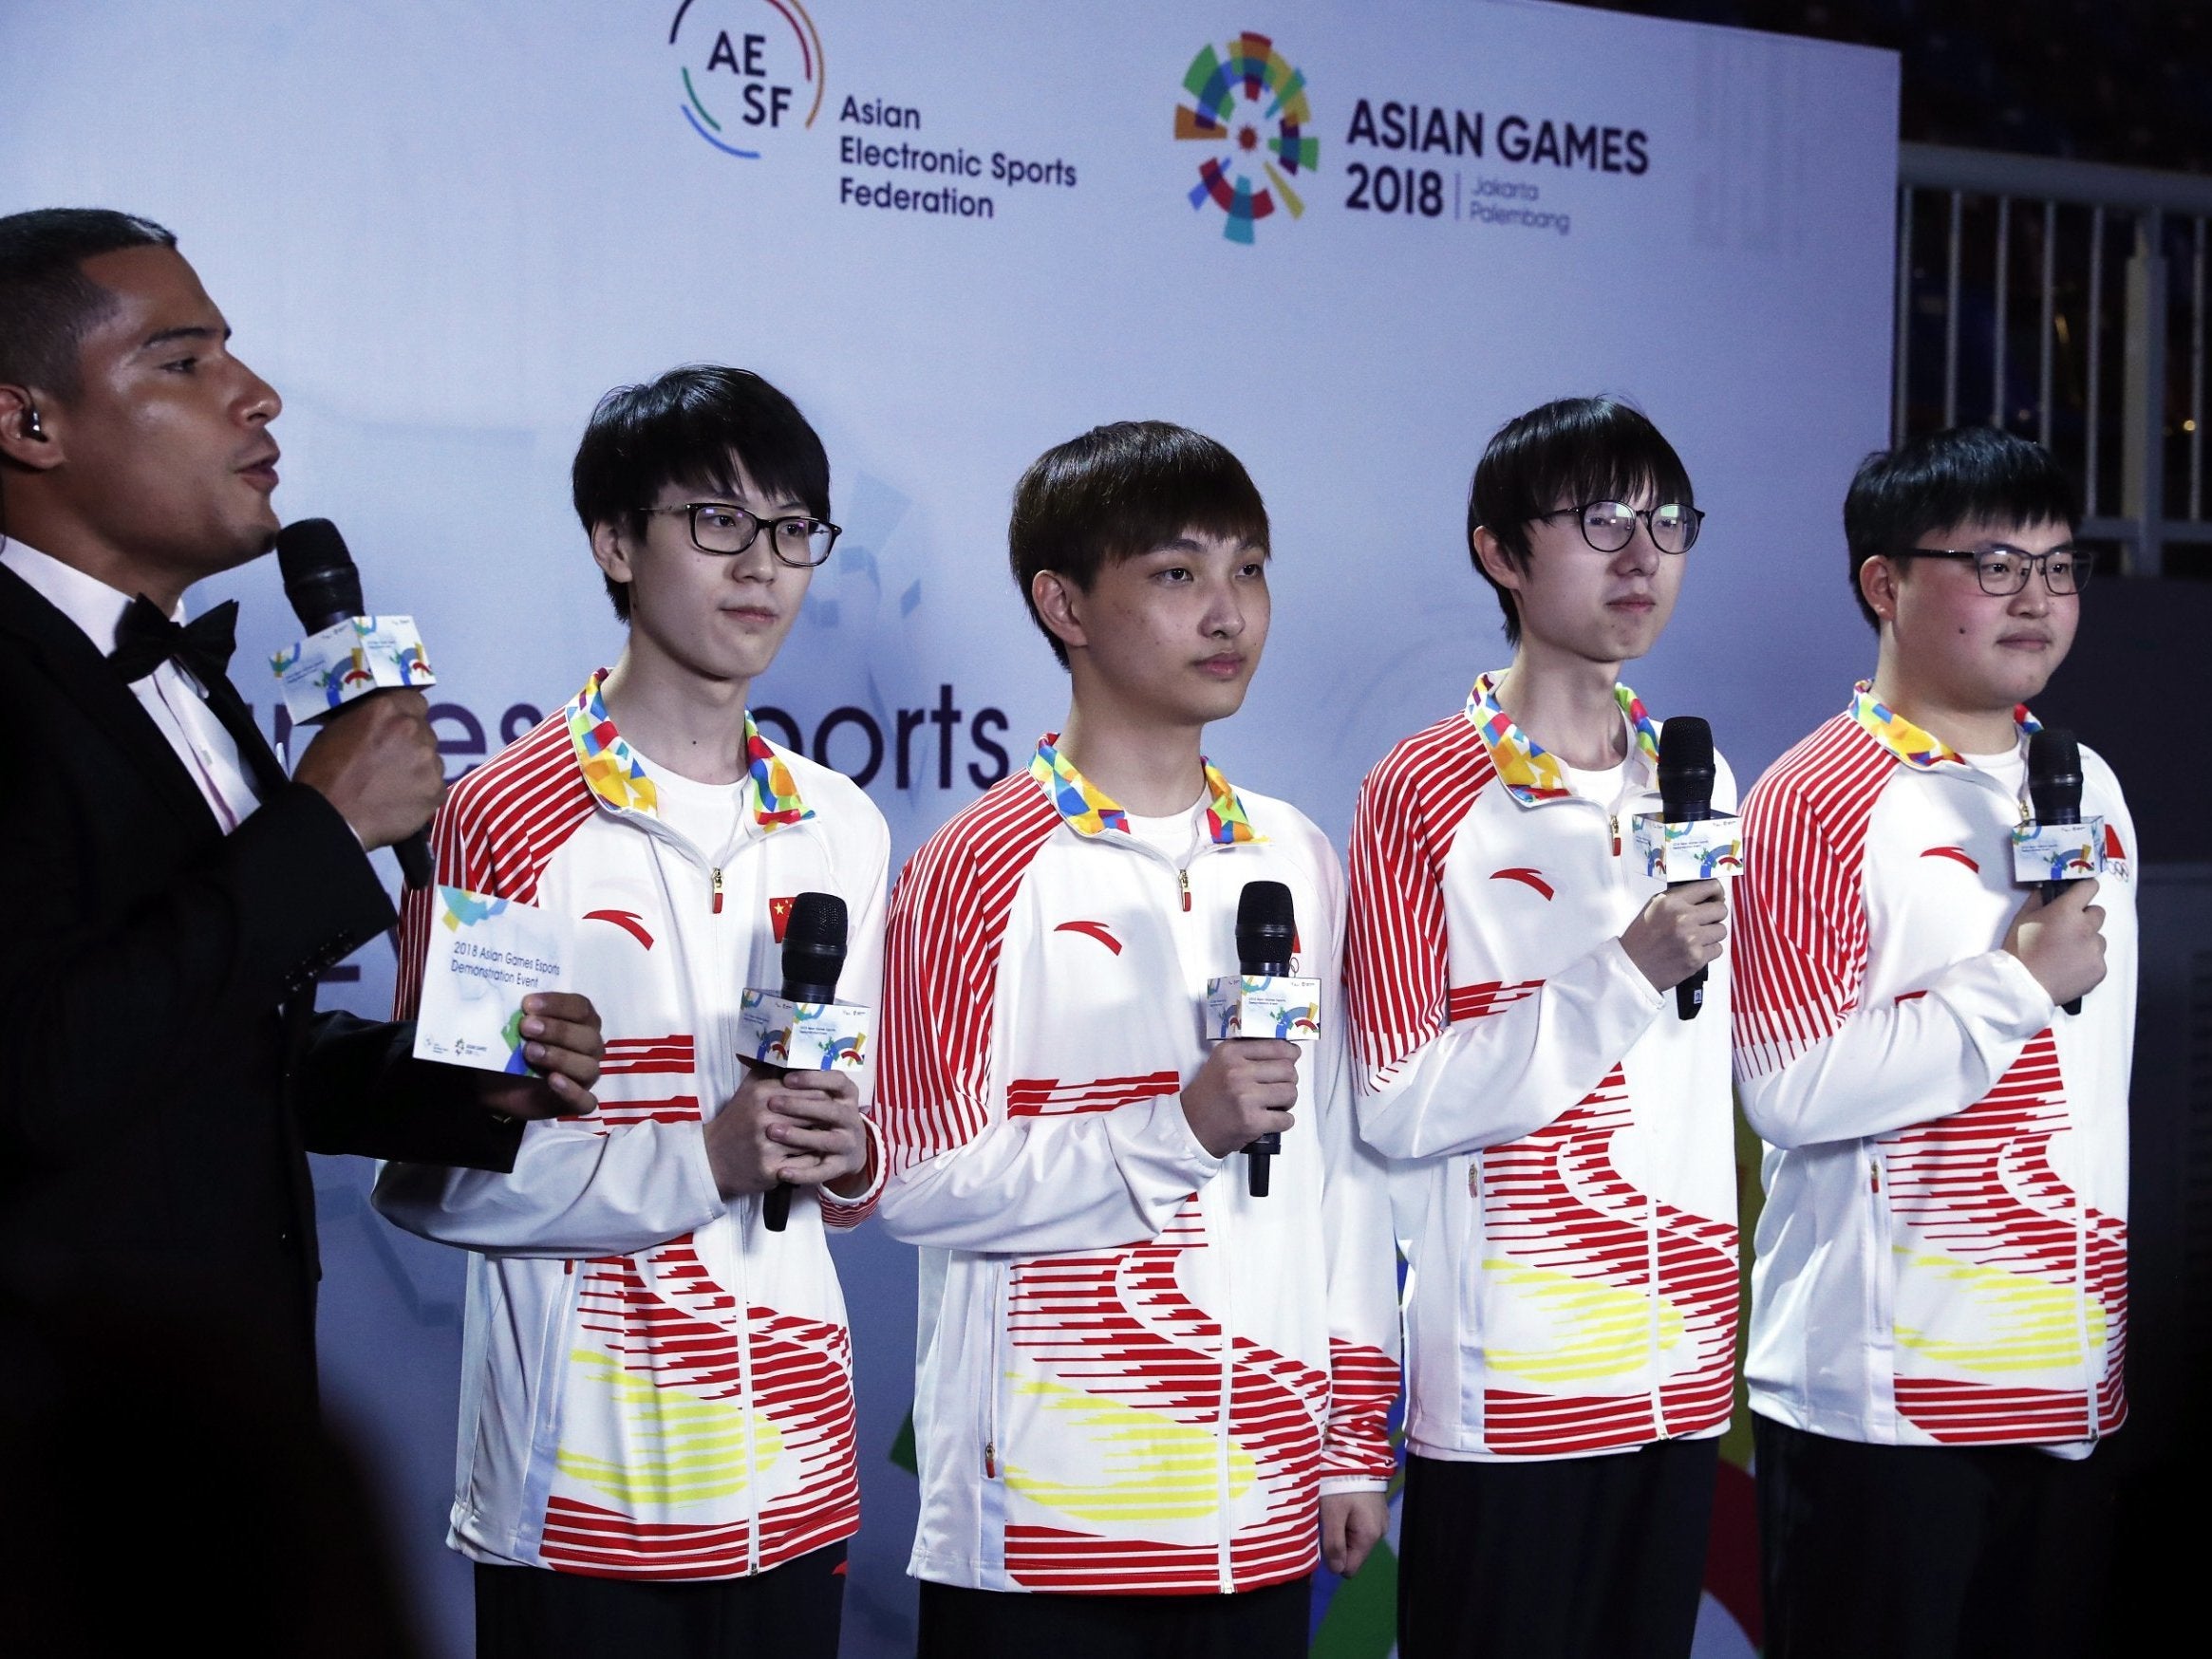 Esports finals winners team China after their win over South Korea at the Asian Games 2018